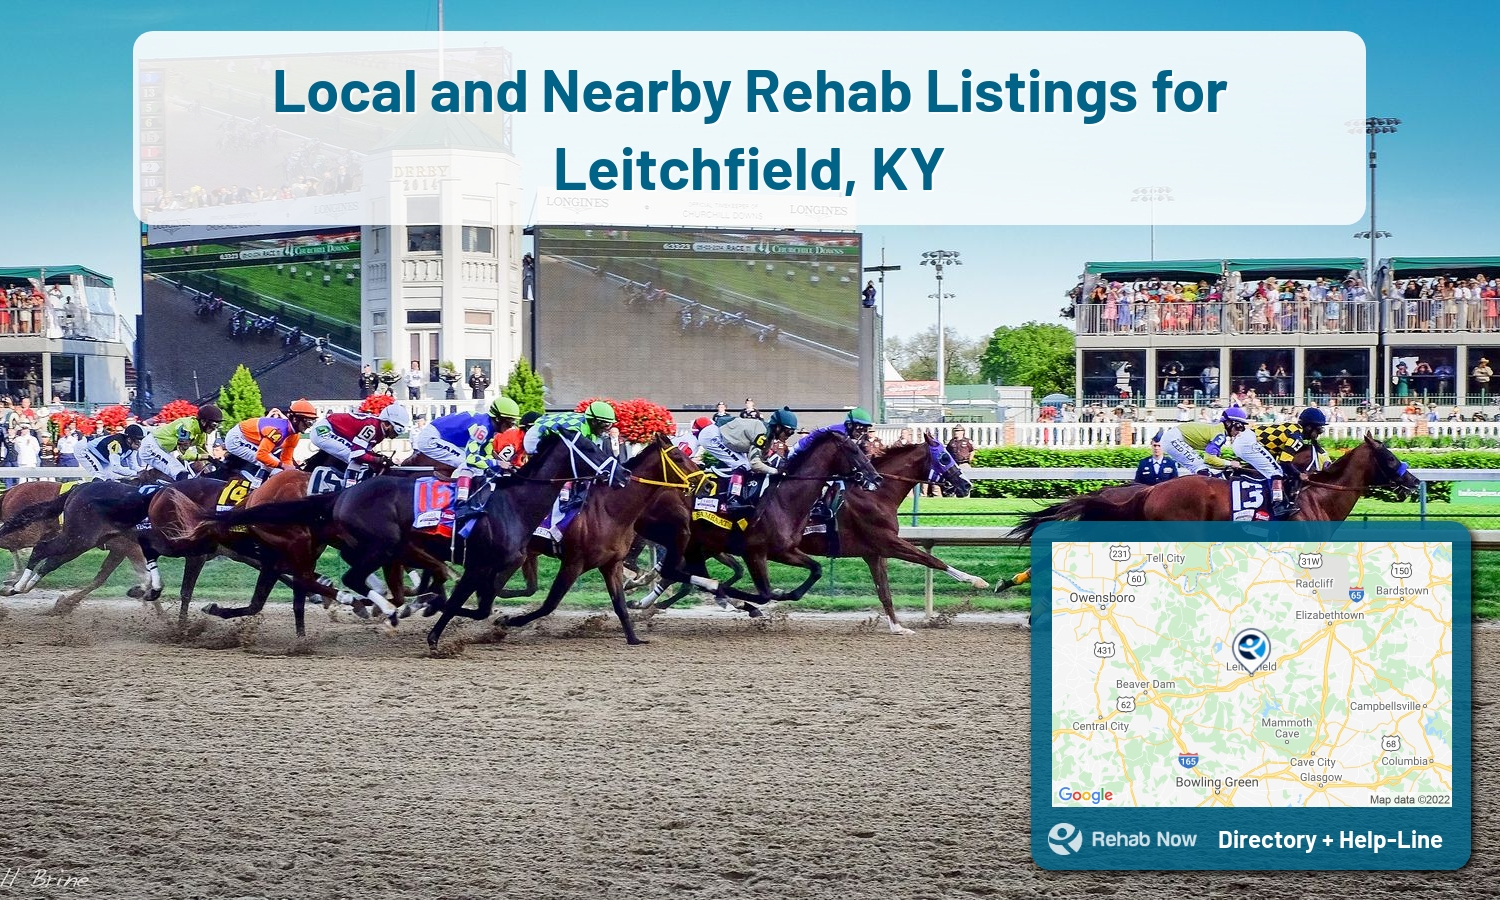 Leitchfield, KY Treatment Centers. Find drug rehab in Leitchfield, Kentucky, or detox and treatment programs. Get the right help now!